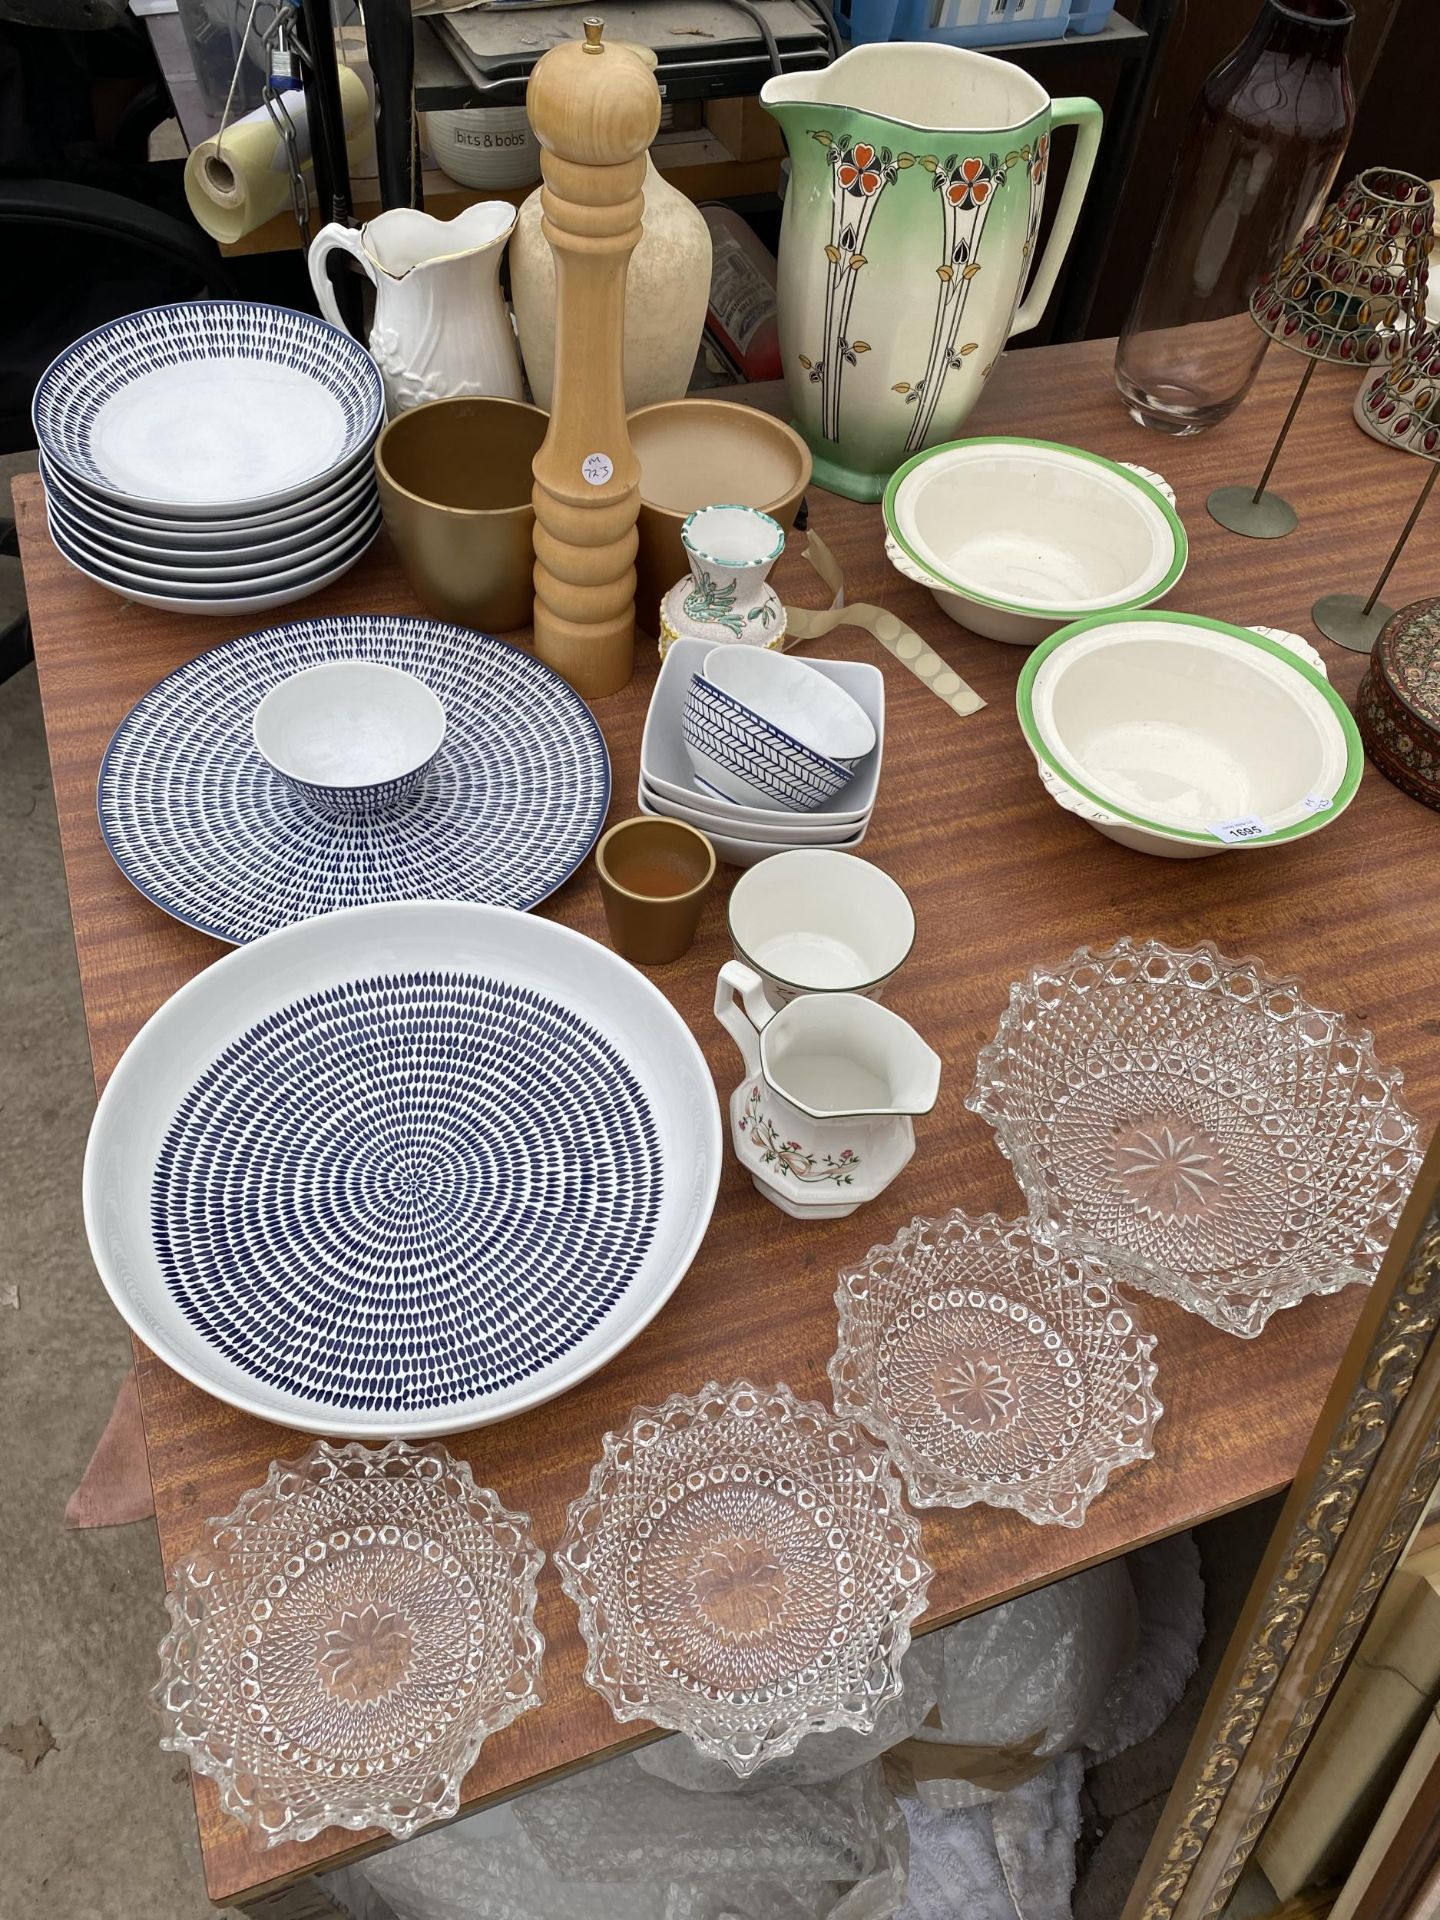 A LARGE ASSORTMENT OF CERAMICS AND GLASS WARE TO INCLUDE A WASH JUG, PLATES AND BOWLS ETC